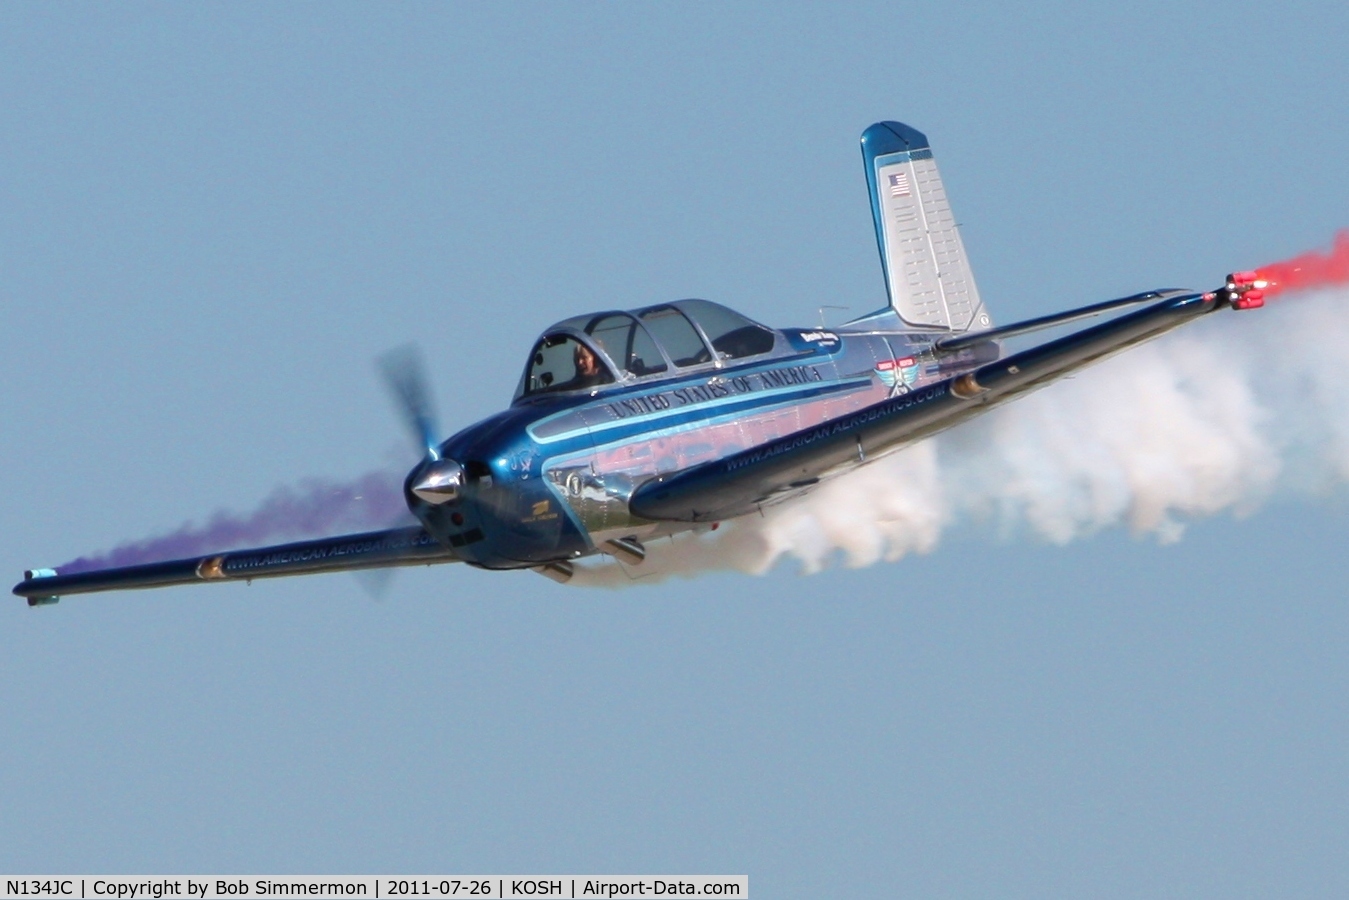 N134JC, 1955 Beech T-34-A (A45) Mentor C/N G-812, Performing at Airventure 2011